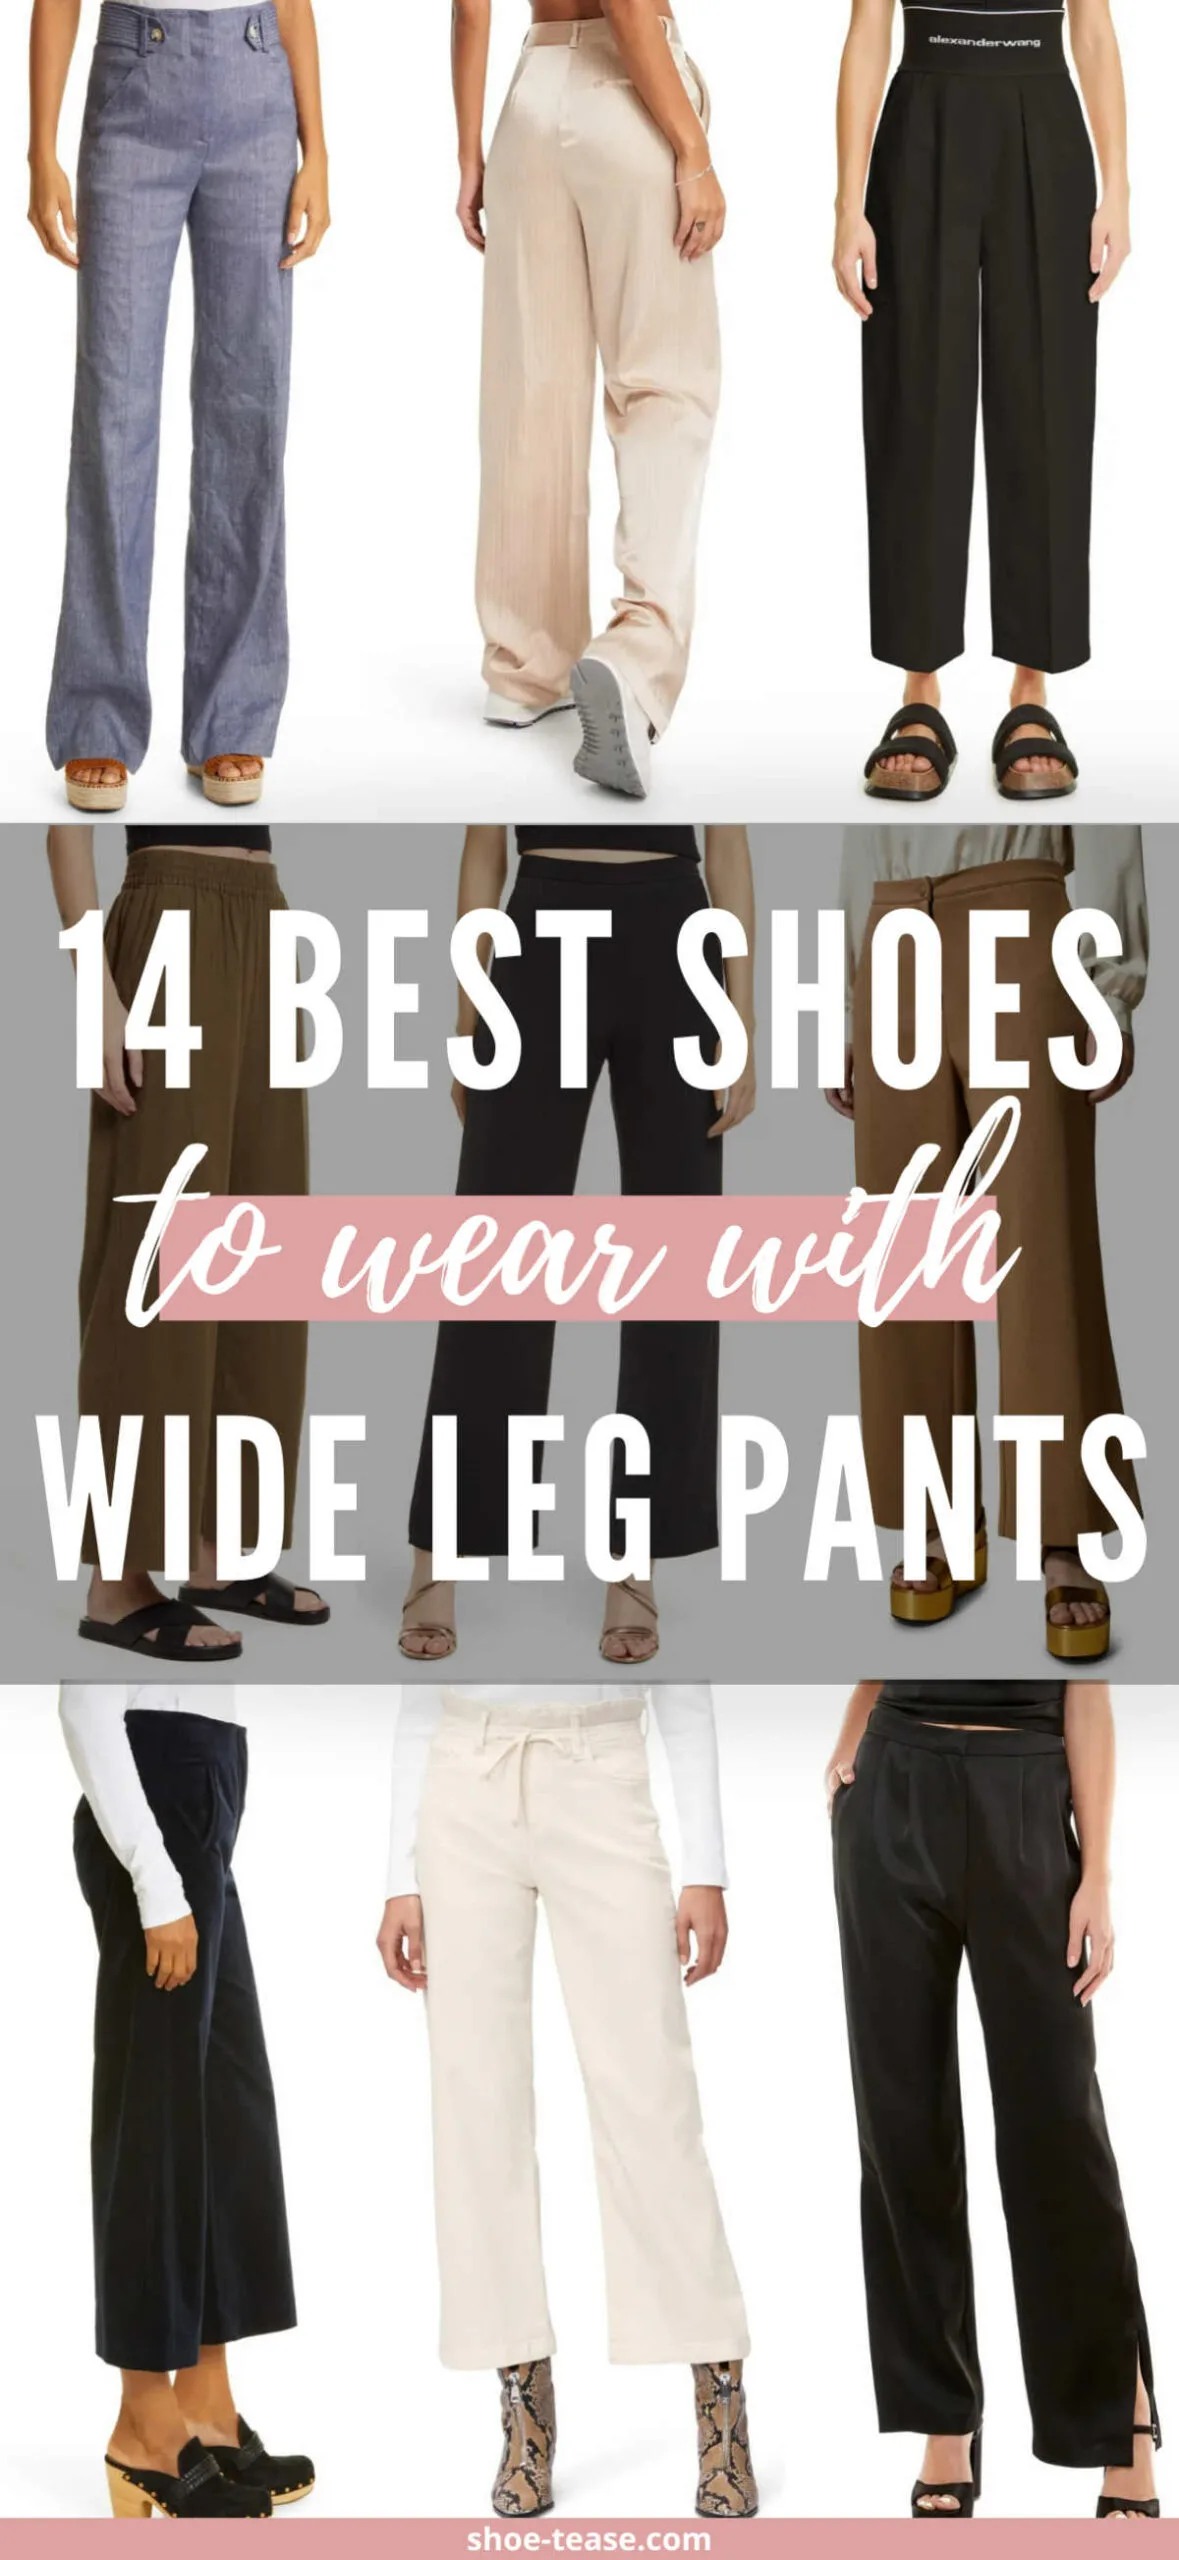 Best shoes to wear with wide leg pants shoetease scaled.jpg